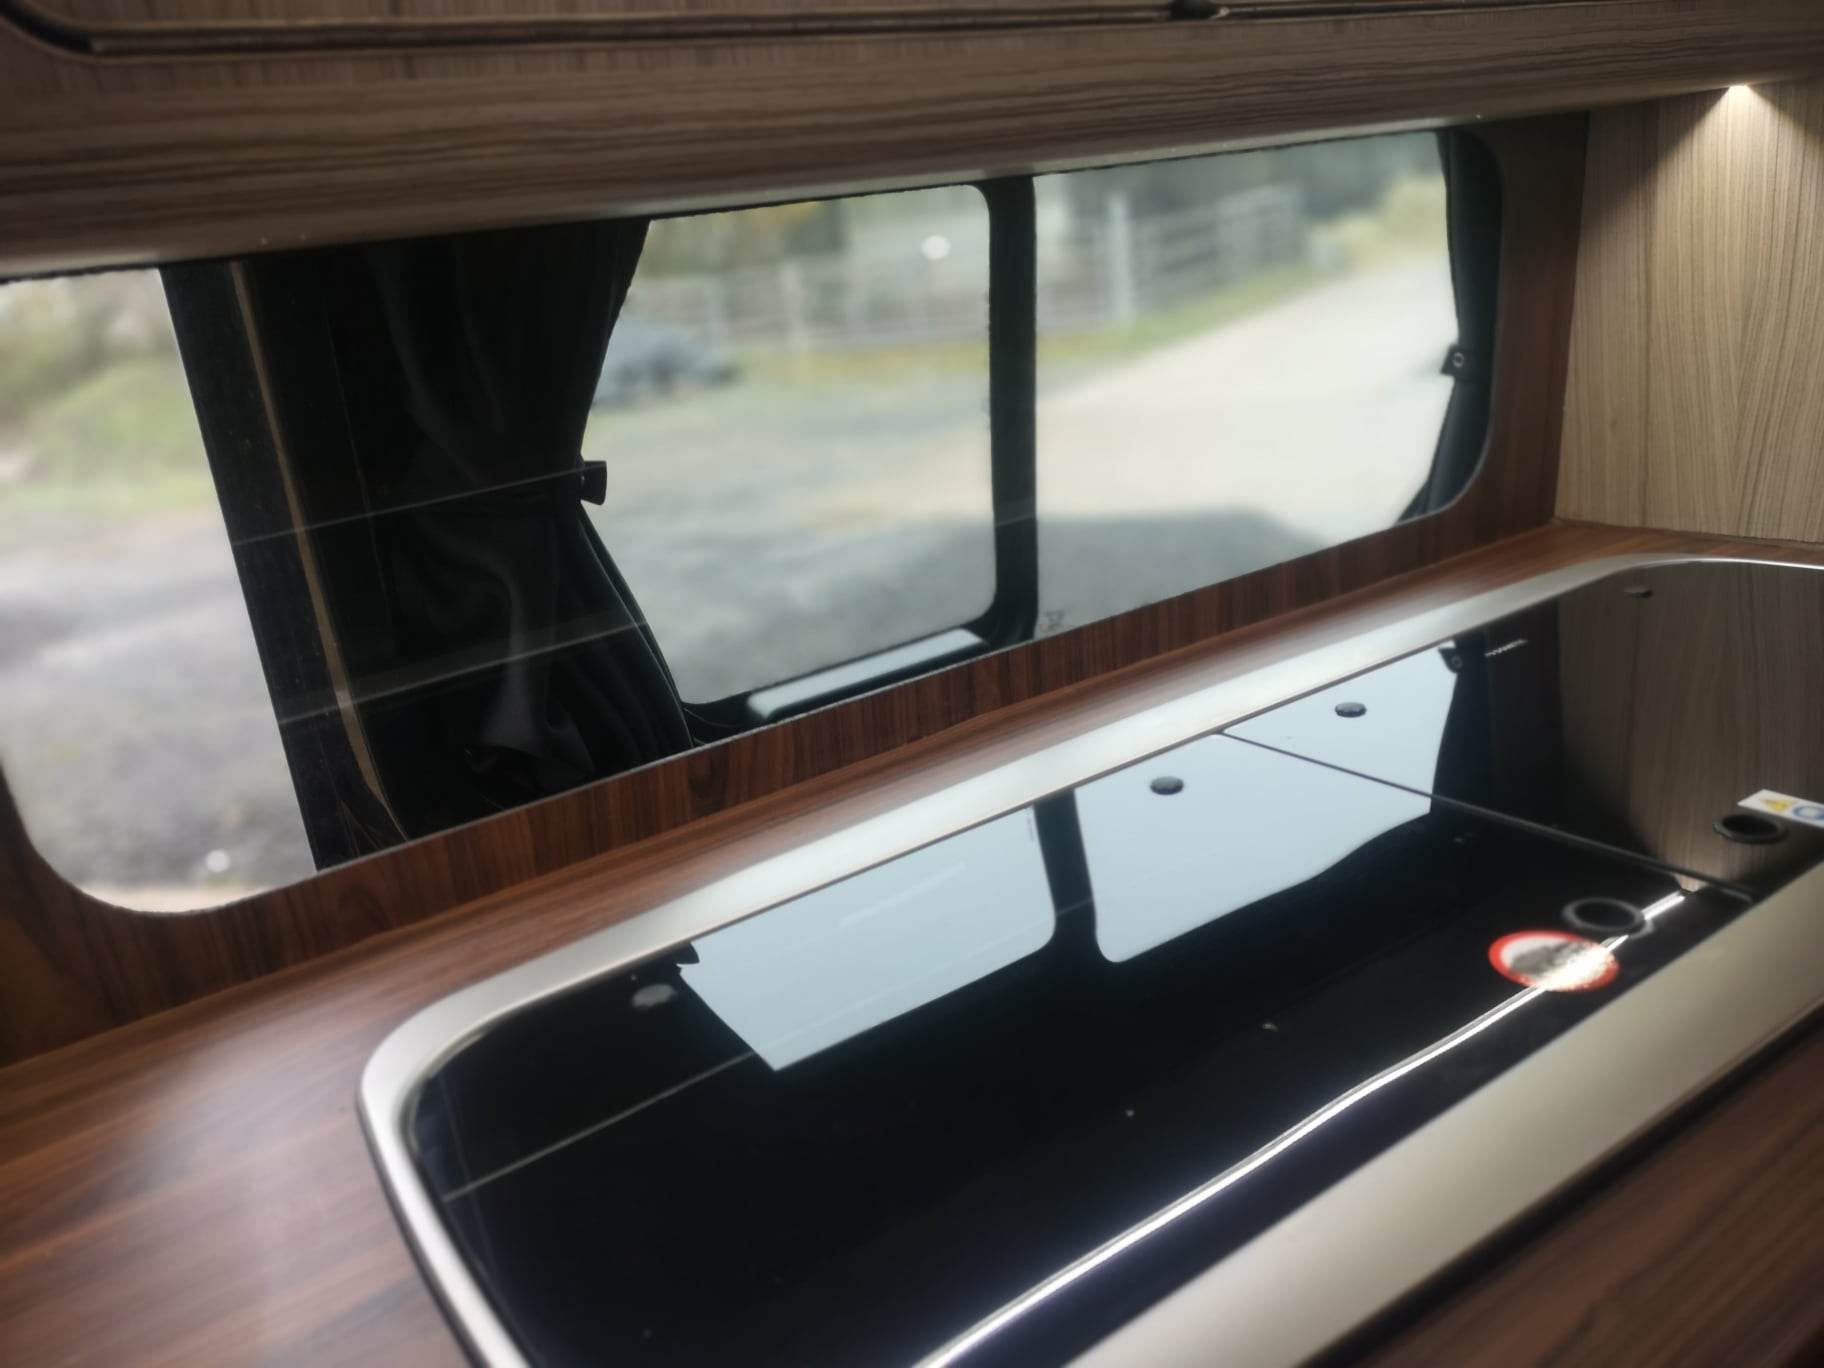 The 'Witley' Renault Trafic Sport with an automatic option by CCCAMPERS - cccampers.myshopify.com